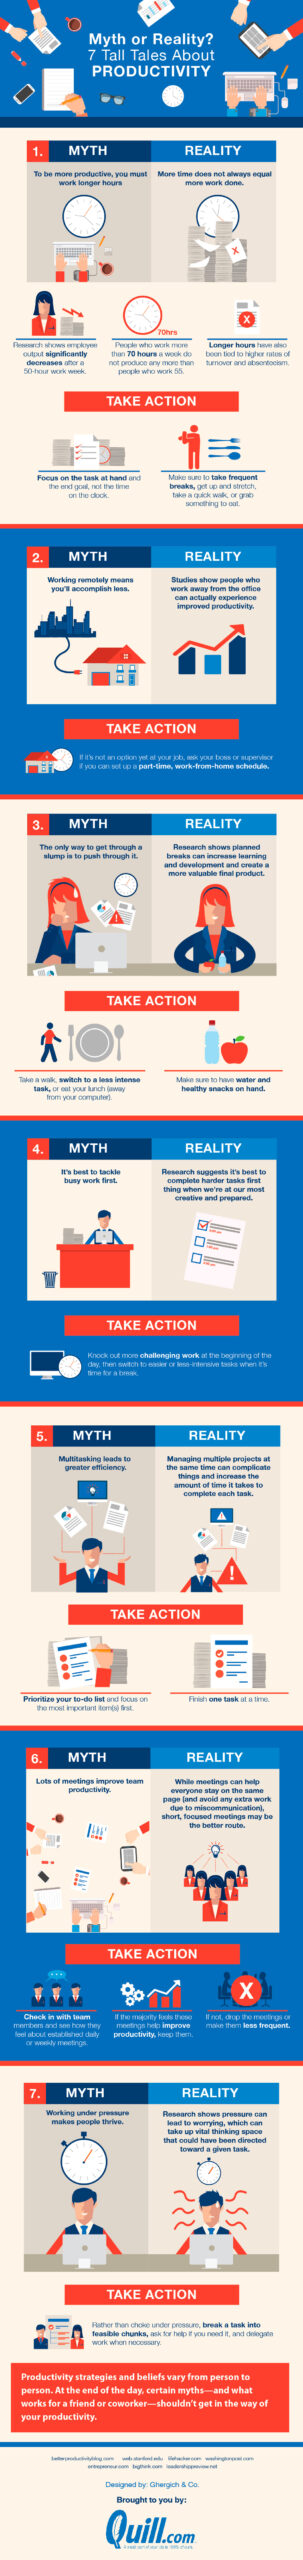 Myth or Reality? 7 Tall Tales About Productivity